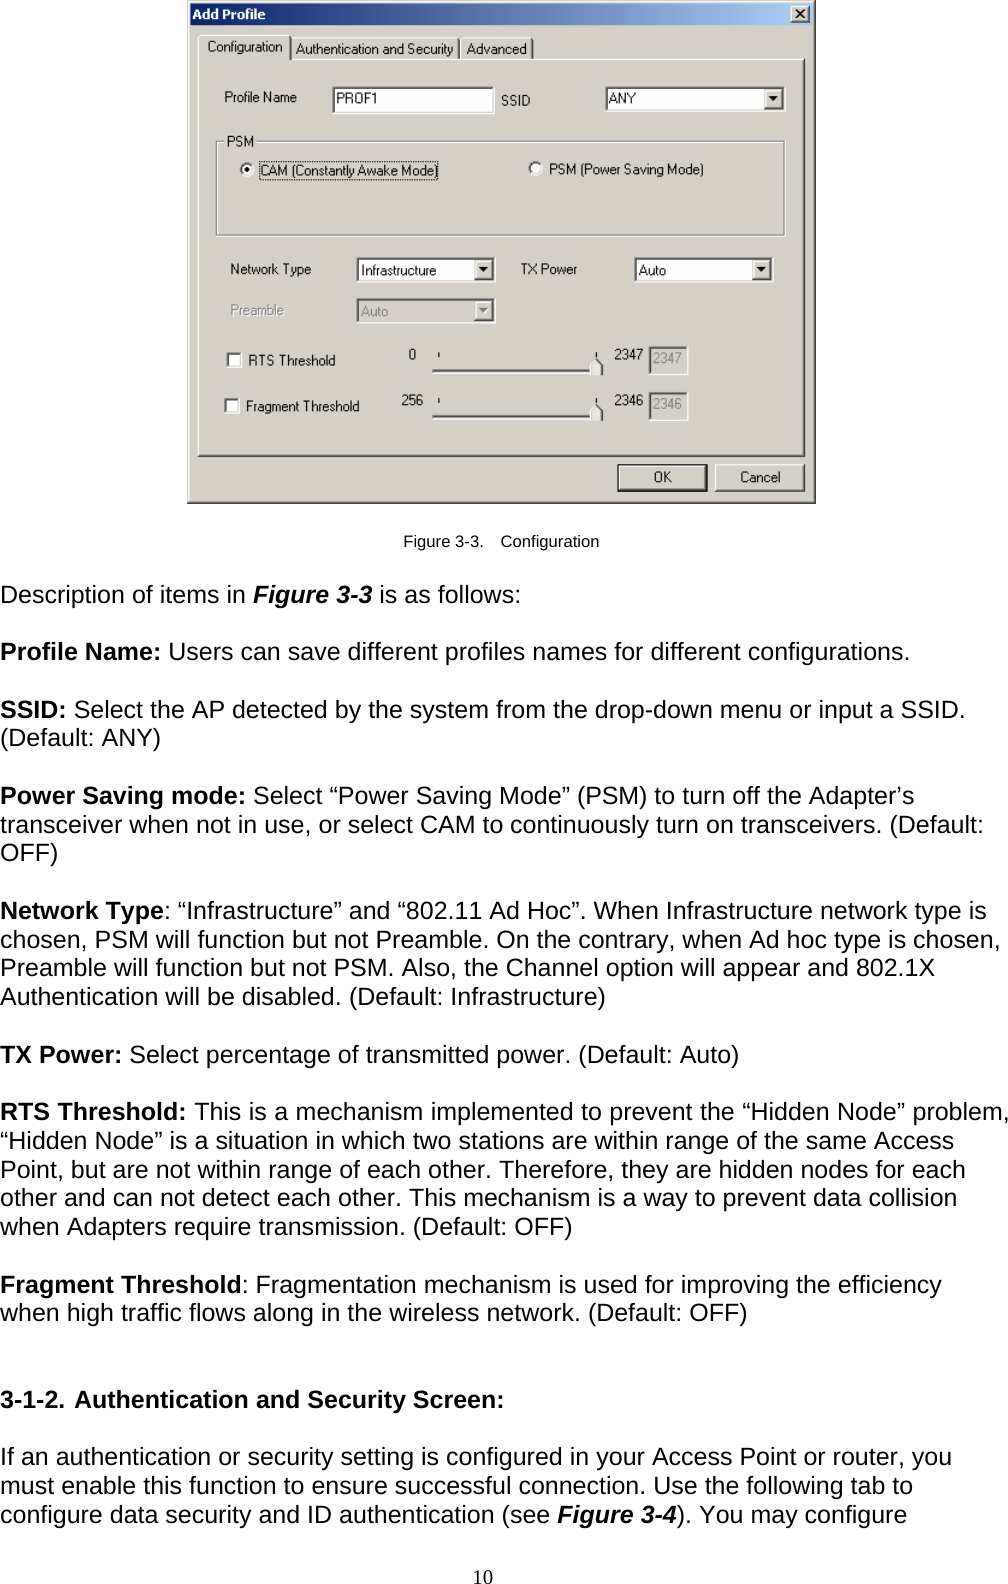 10     Figure 3-3.  Configuration  Description of items in Figure 3-3 is as follows:  Profile Name: Users can save different profiles names for different configurations.  SSID: Select the AP detected by the system from the drop-down menu or input a SSID. (Default: ANY)  Power Saving mode: Select “Power Saving Mode” (PSM) to turn off the Adapter’s transceiver when not in use, or select CAM to continuously turn on transceivers. (Default: OFF)  Network Type: “Infrastructure” and “802.11 Ad Hoc”. When Infrastructure network type is chosen, PSM will function but not Preamble. On the contrary, when Ad hoc type is chosen, Preamble will function but not PSM. Also, the Channel option will appear and 802.1X Authentication will be disabled. (Default: Infrastructure)  TX Power: Select percentage of transmitted power. (Default: Auto)  RTS Threshold: This is a mechanism implemented to prevent the “Hidden Node” problem, “Hidden Node” is a situation in which two stations are within range of the same Access Point, but are not within range of each other. Therefore, they are hidden nodes for each other and can not detect each other. This mechanism is a way to prevent data collision when Adapters require transmission. (Default: OFF)  Fragment Threshold: Fragmentation mechanism is used for improving the efficiency when high traffic flows along in the wireless network. (Default: OFF)   3-1-2. Authentication and Security Screen:  If an authentication or security setting is configured in your Access Point or router, you must enable this function to ensure successful connection. Use the following tab to configure data security and ID authentication (see Figure 3-4). You may configure 